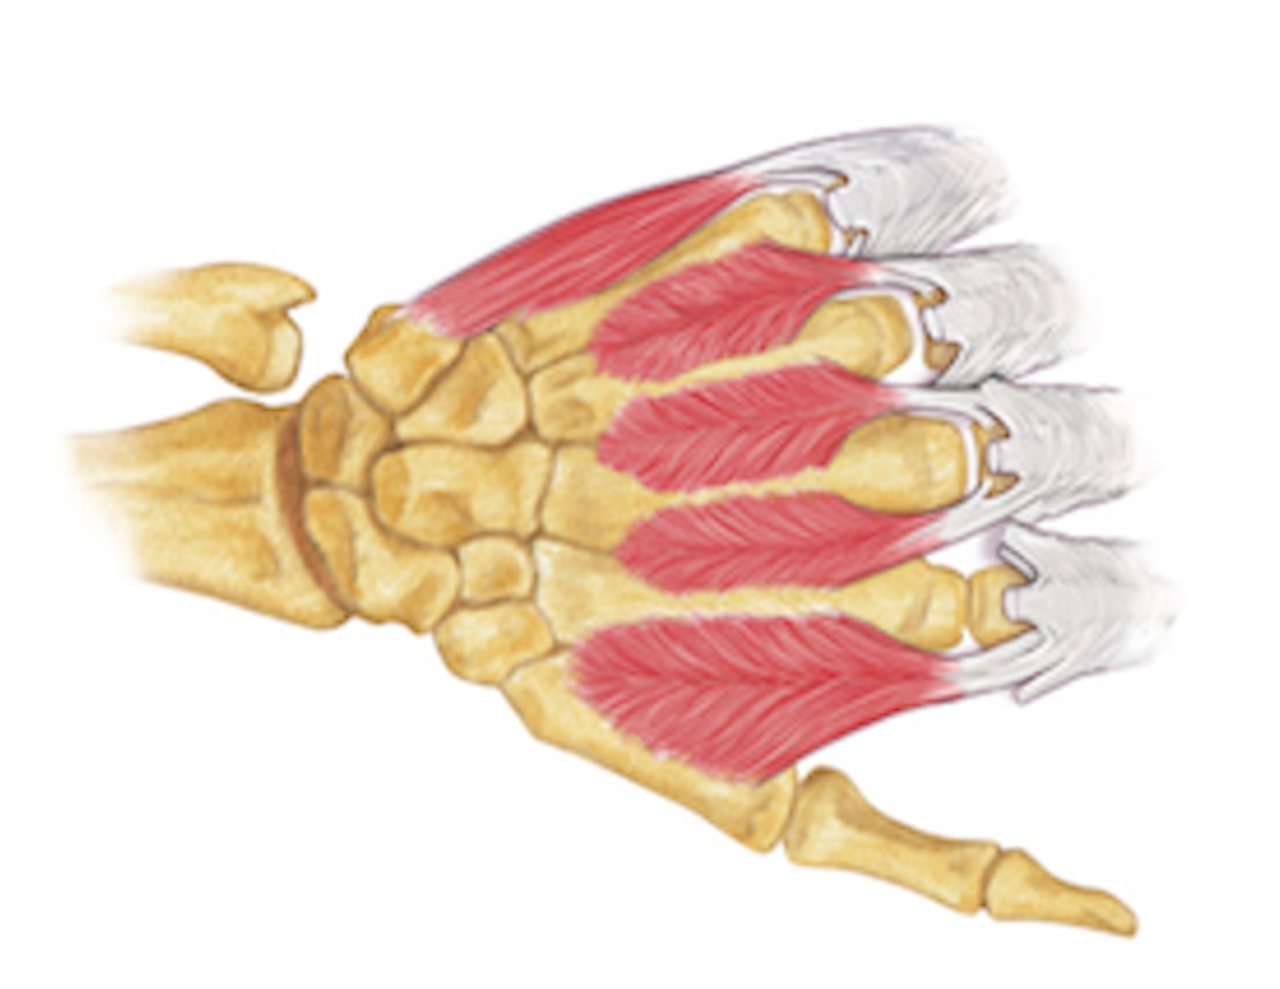 Dorsal interossei are between the metacarpals and abduct the fingers in reference to the long finger.  Usually the dorsal interossei have two heads except the third dorsal interosseous.